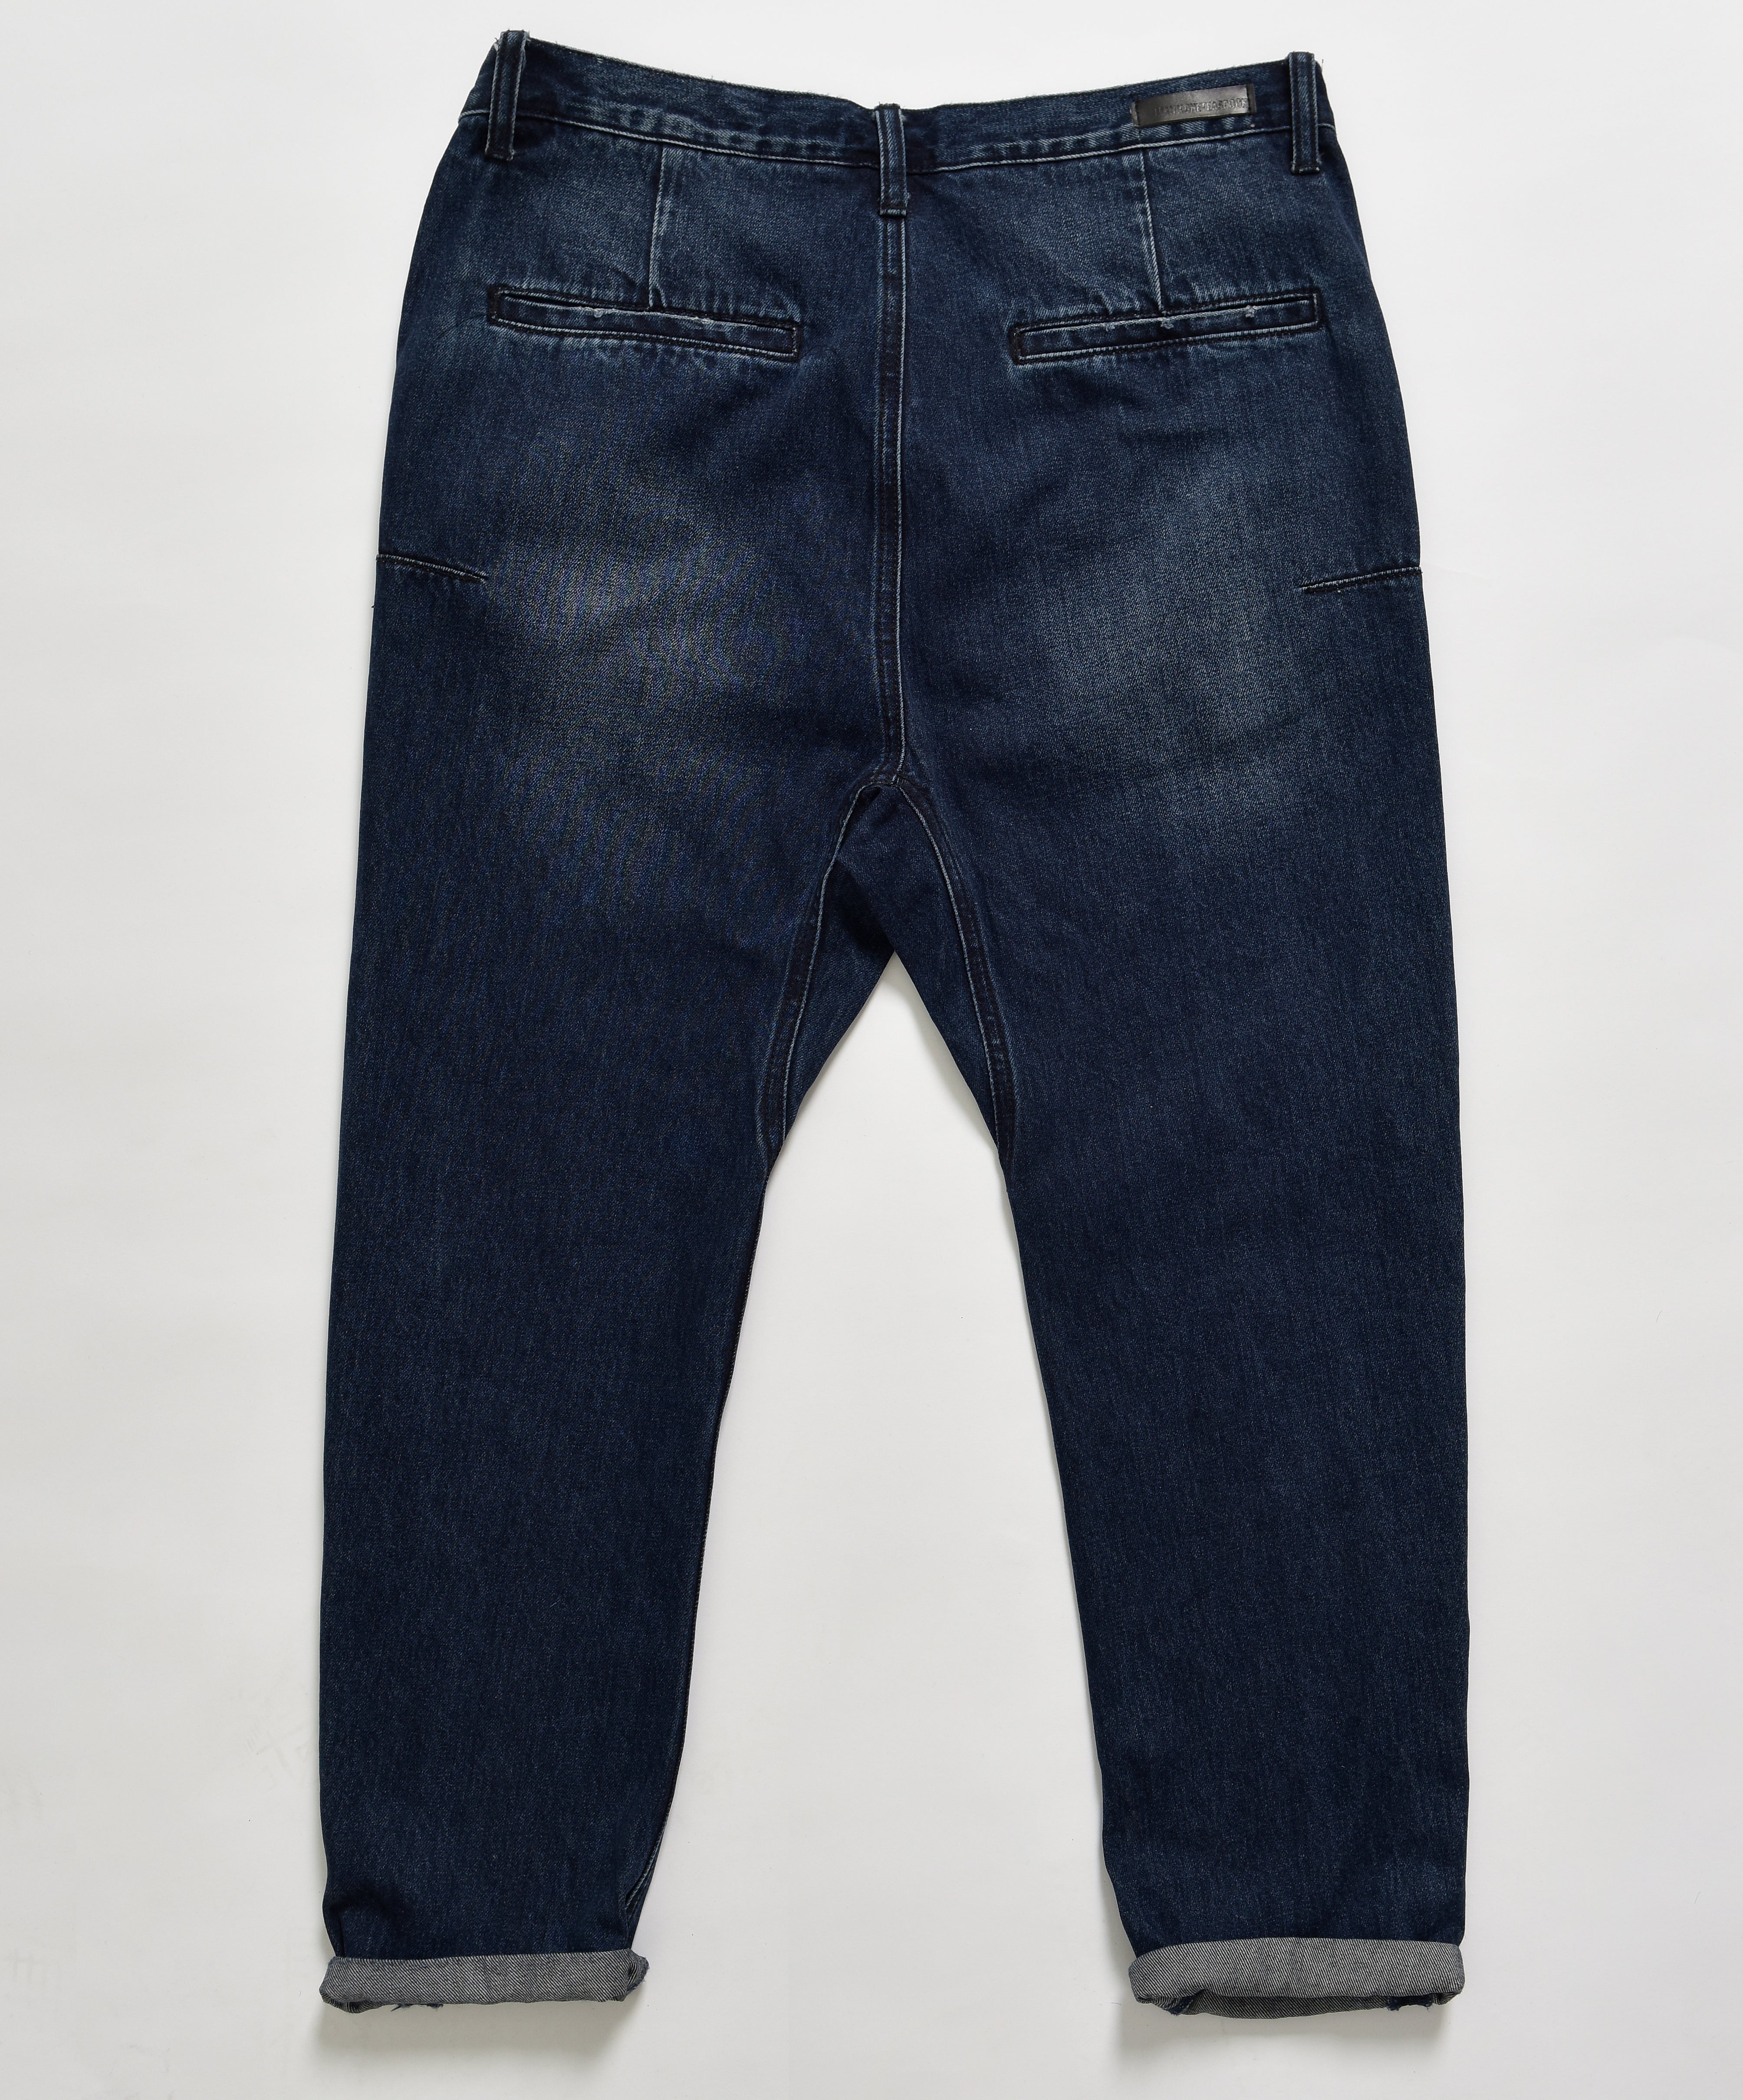 Blue Denim Jeans in Chennai at best price by Mr Perfect Mens Wear - Justdial